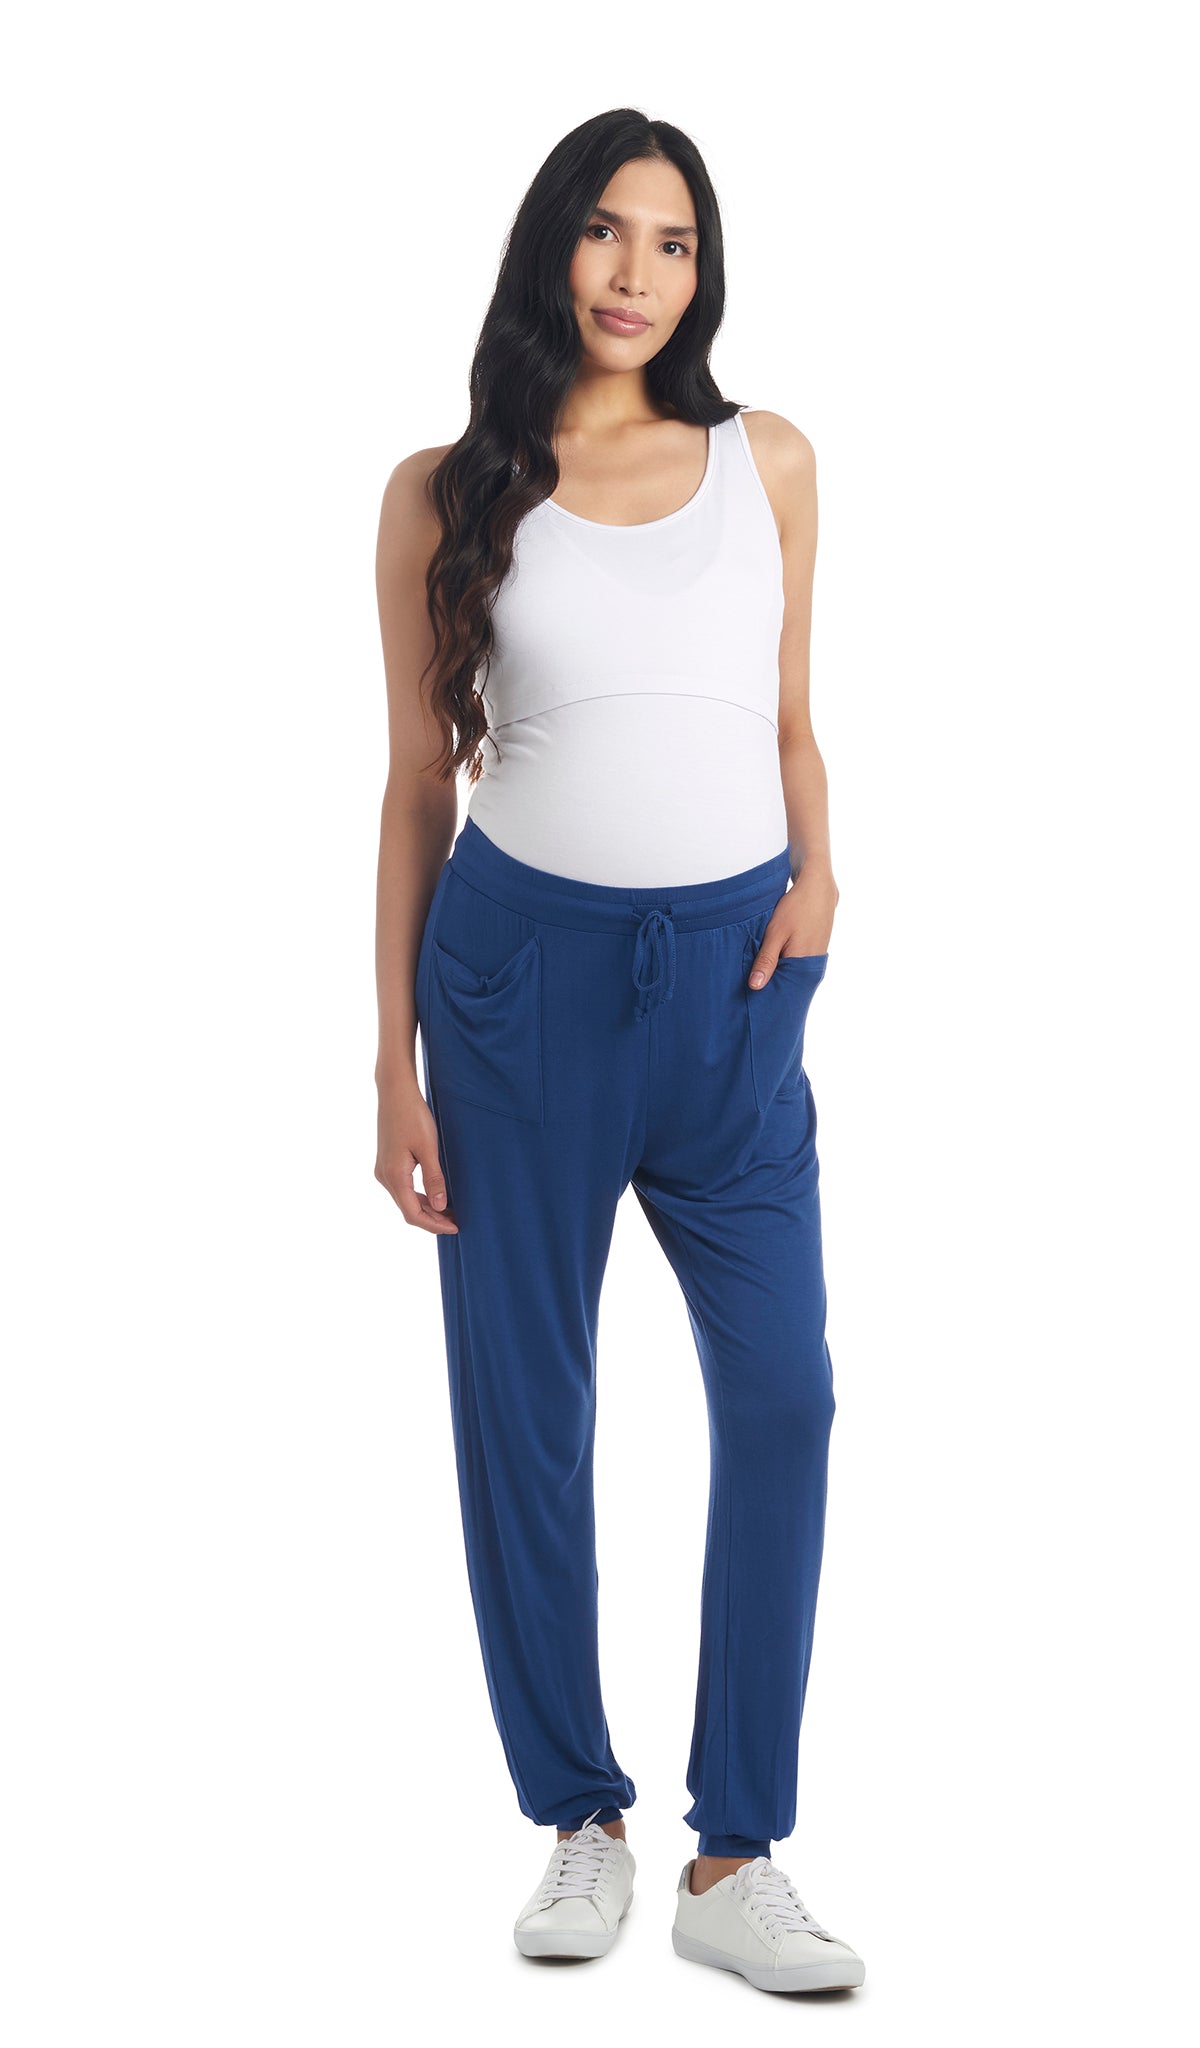 Denim Blue Carmen Jogger on pregnant woman wearing white Kara Tank and with one hand in front pocket of pant.